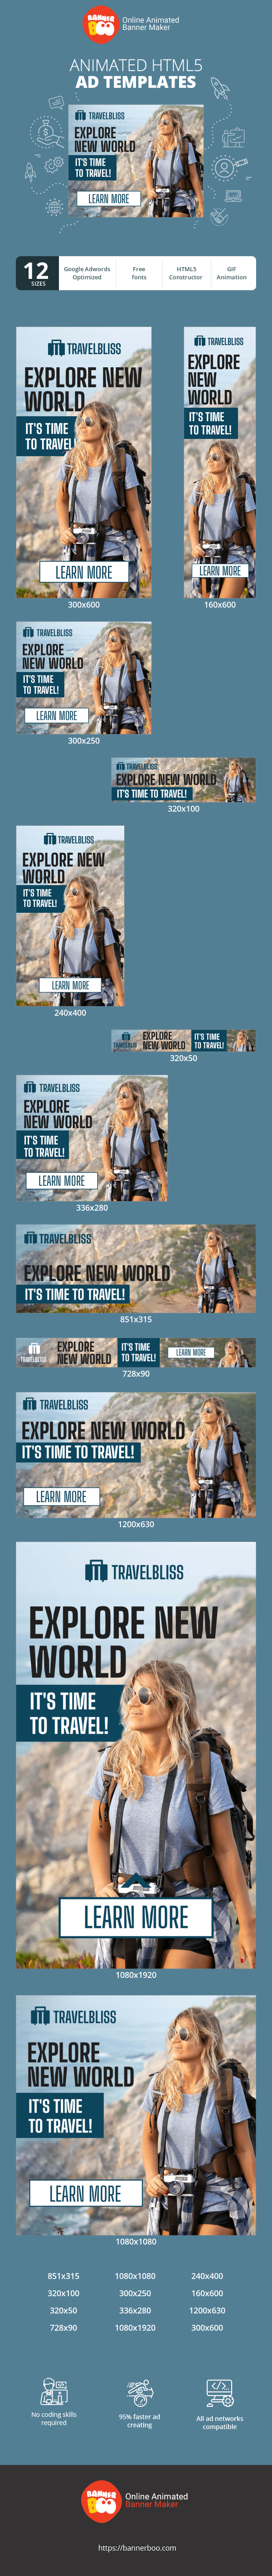 Banner ad template — Explore New World — Its Time To Travel!